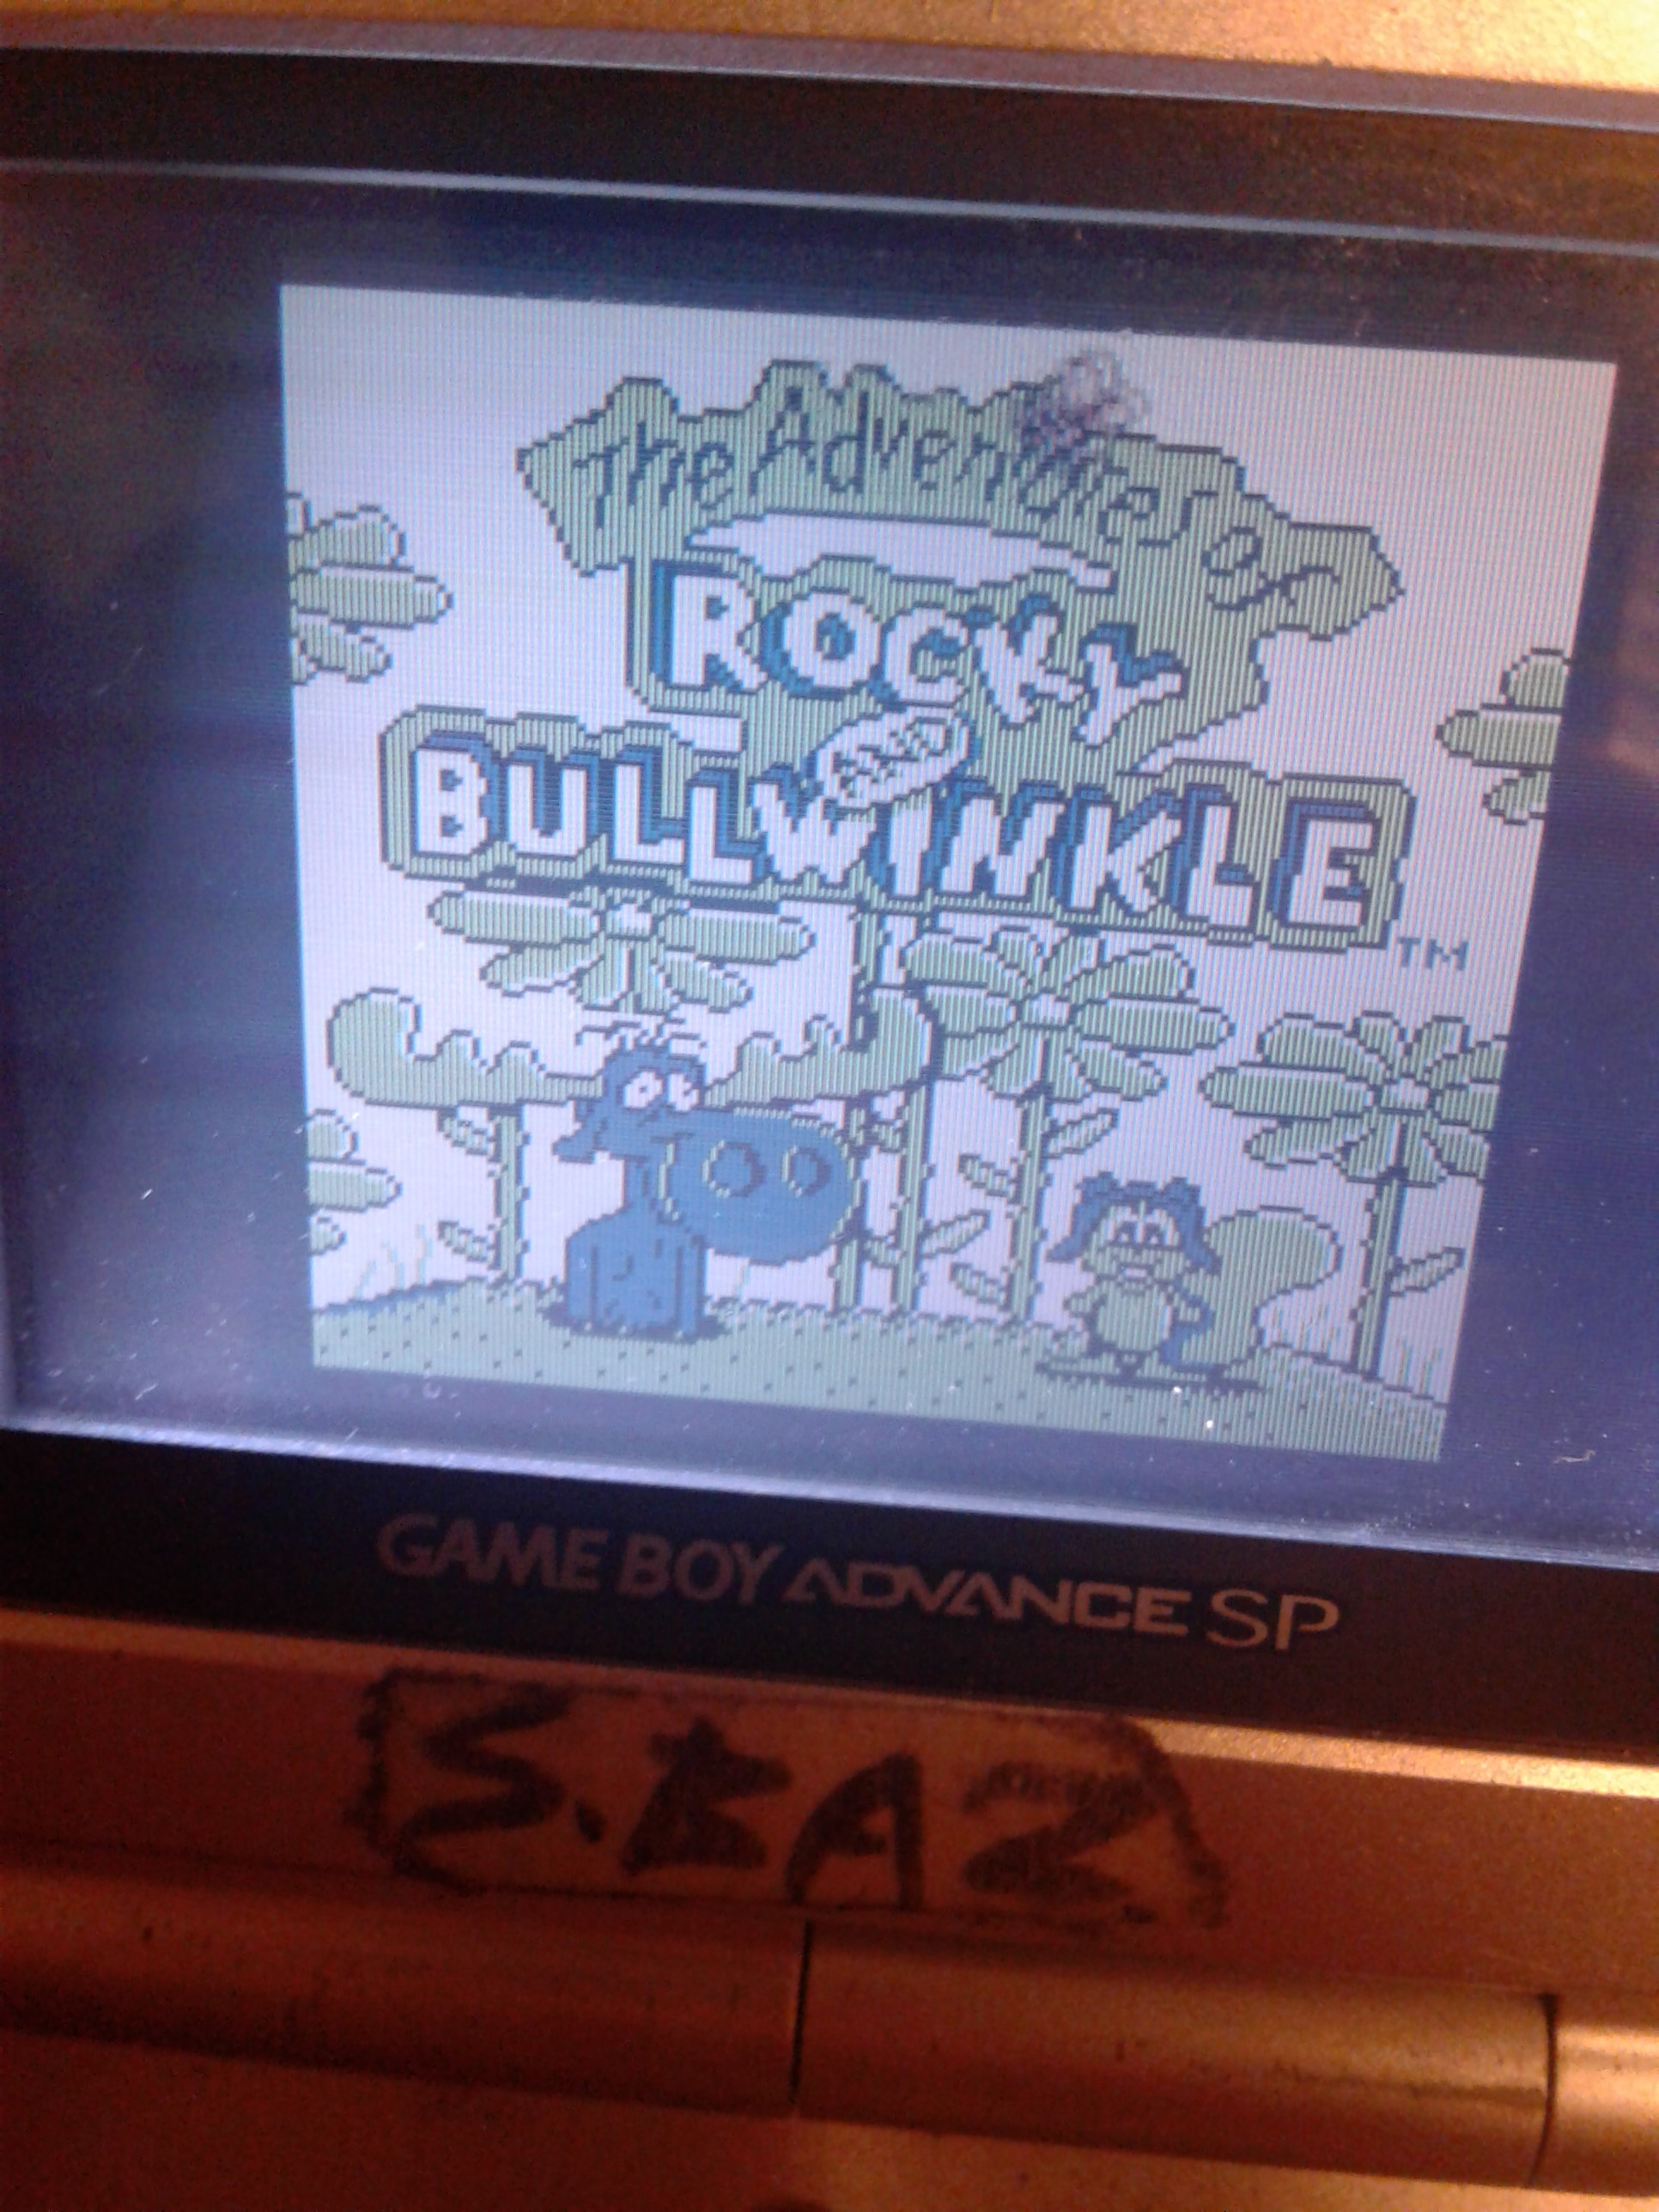 S.BAZ: The Adventures Of Rocky & Bullwinkle (Game Boy) 160 points on 2021-04-24 11:37:01